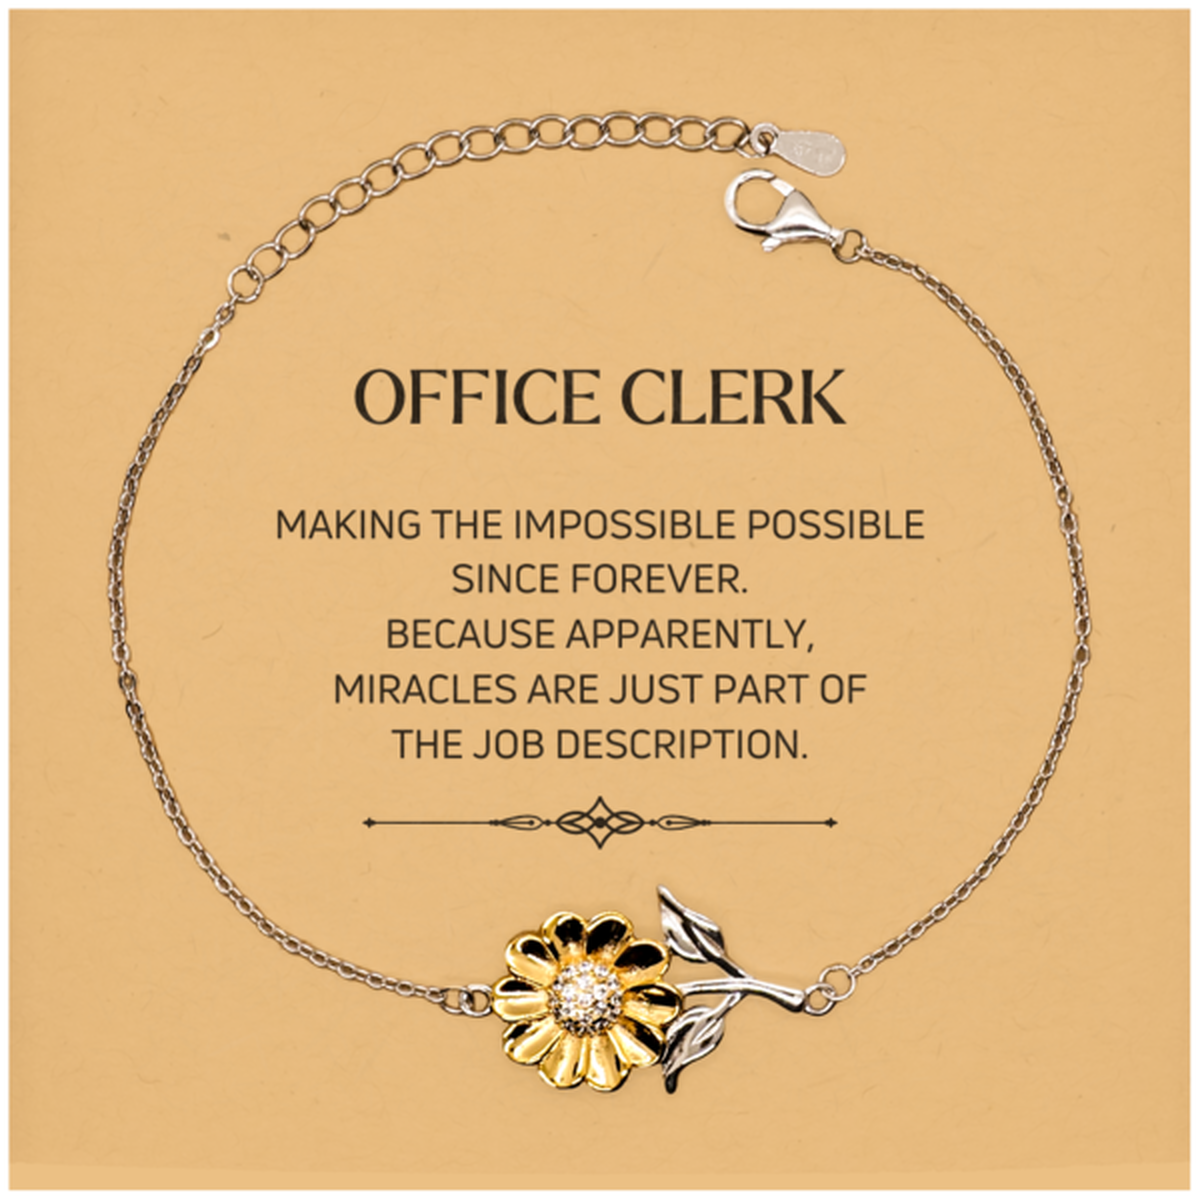 Funny Office Clerk Gifts, Miracles are just part of the job description, Inspirational Birthday Christmas Sunflower Bracelet For Office Clerk, Men, Women, Coworkers, Friends, Boss